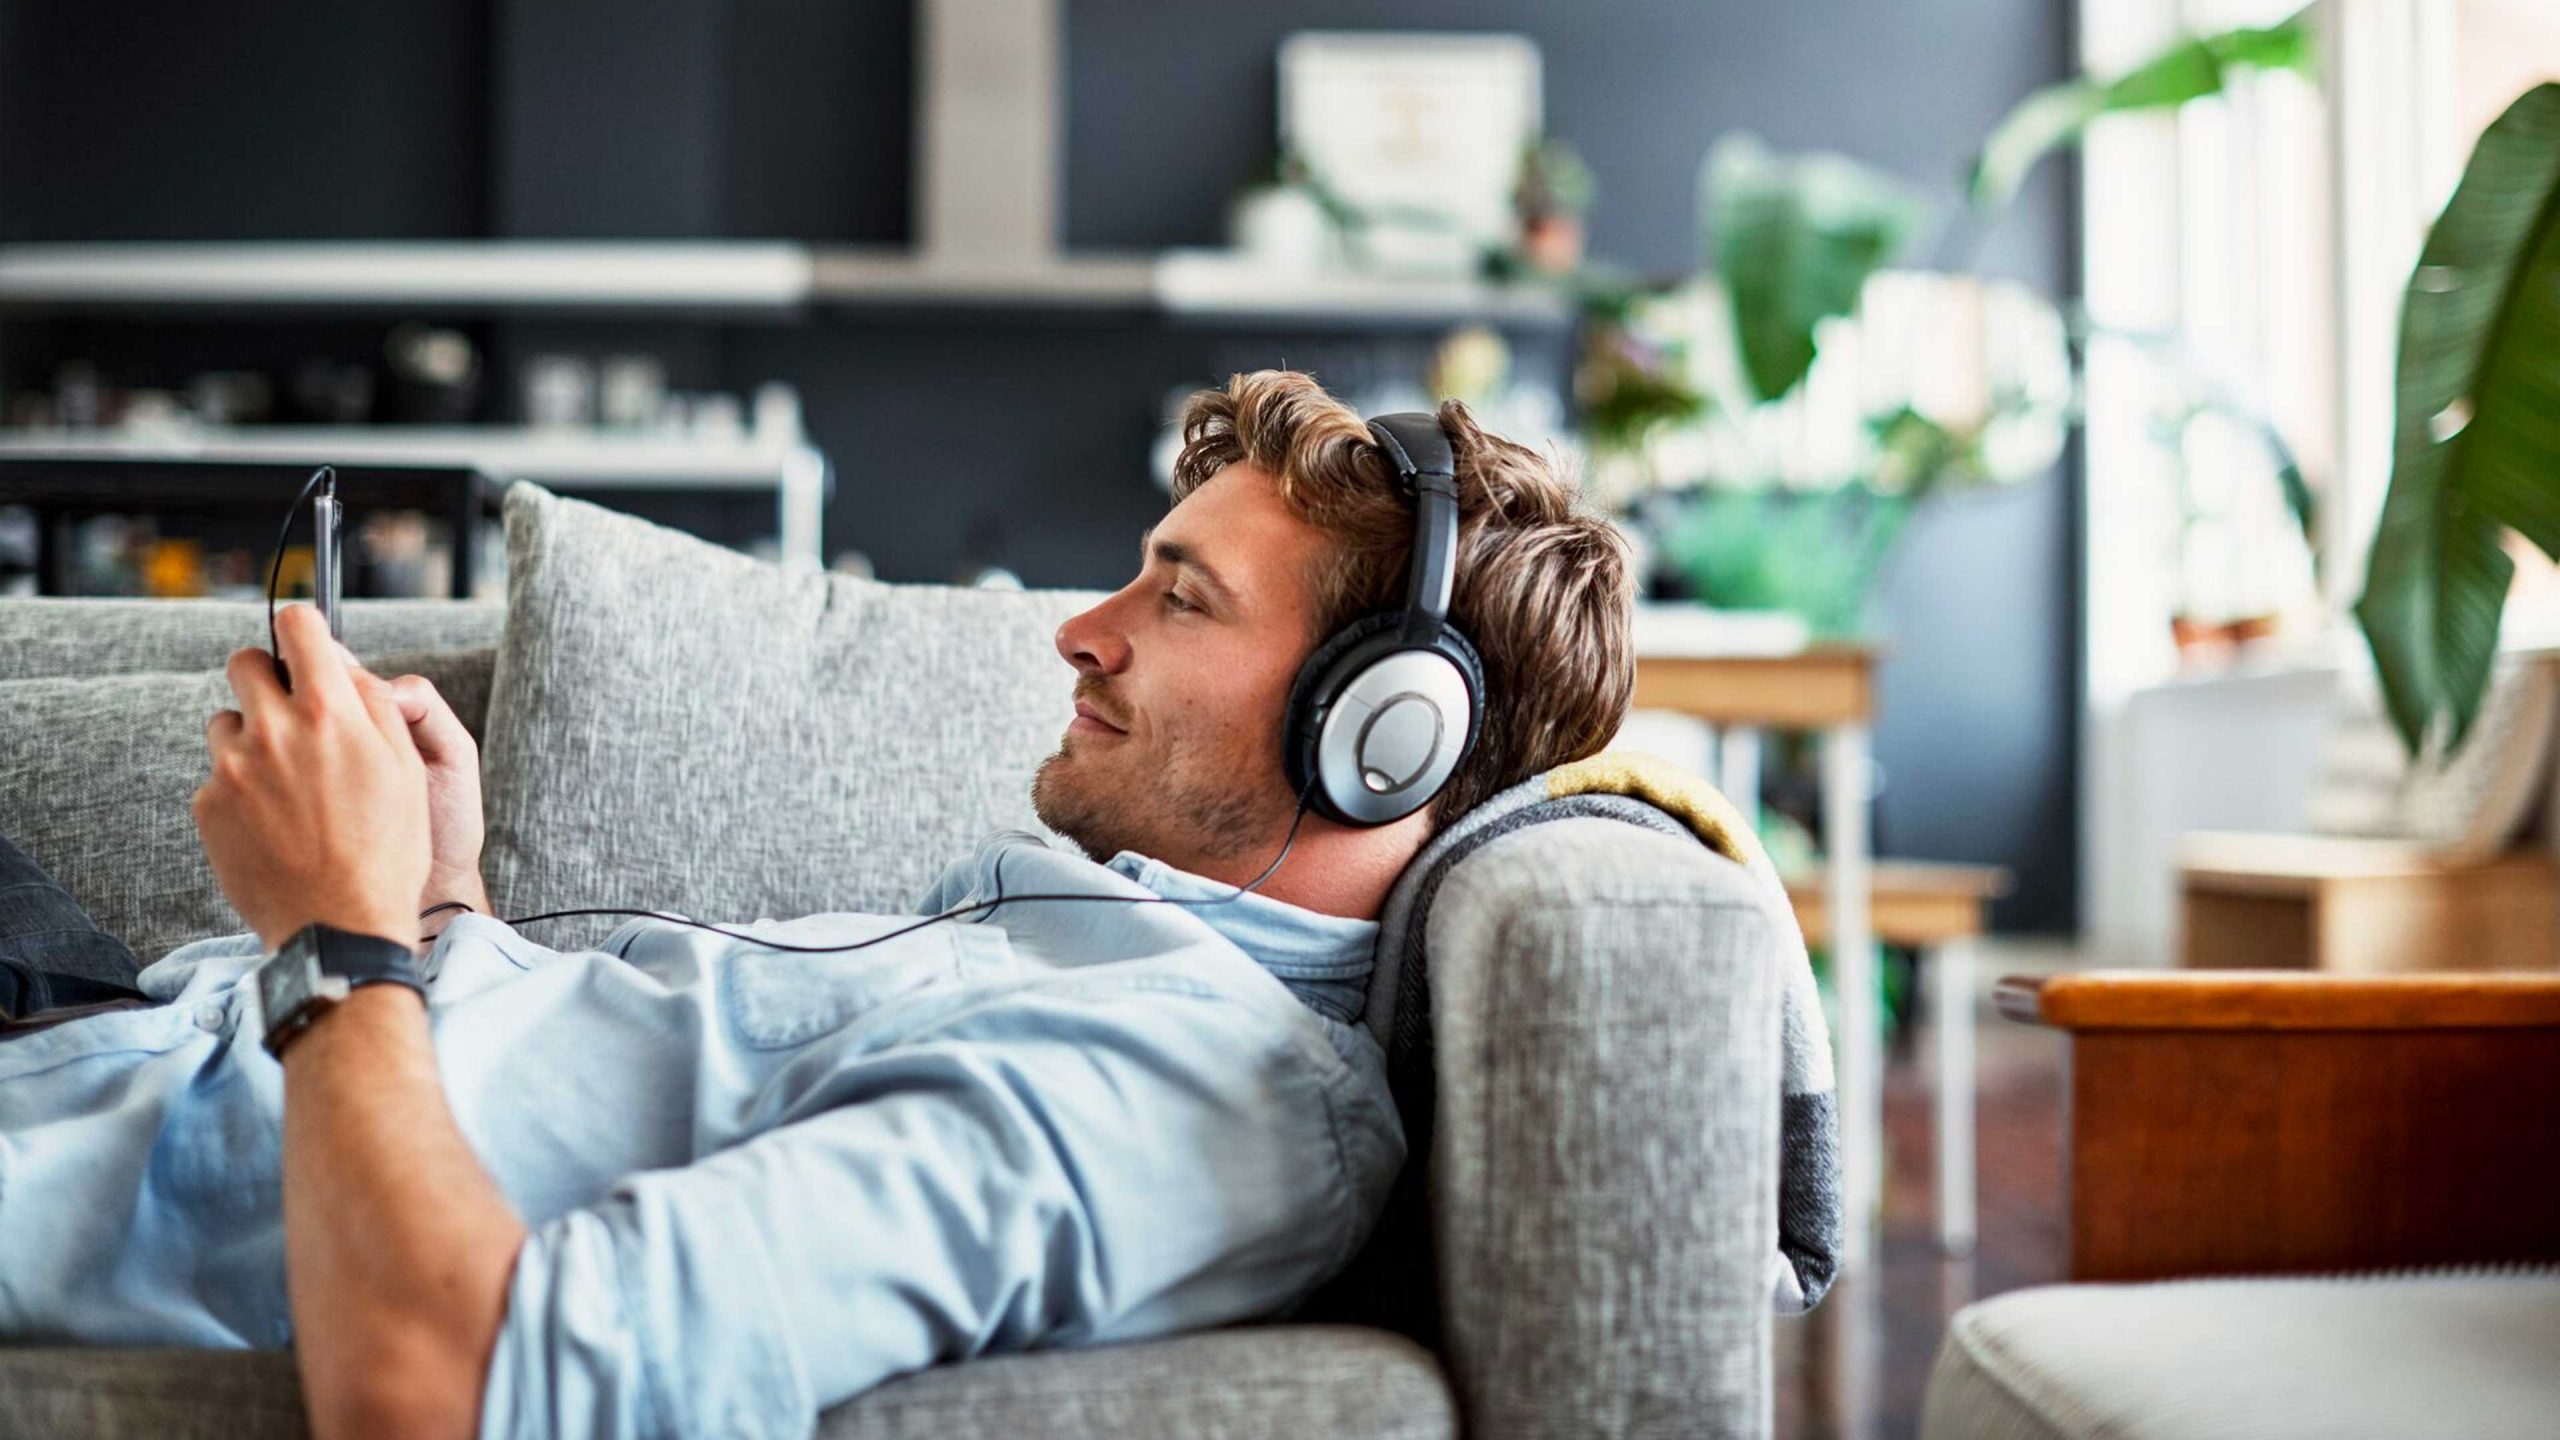 44% of respondents claimed to use audio to reduce stress